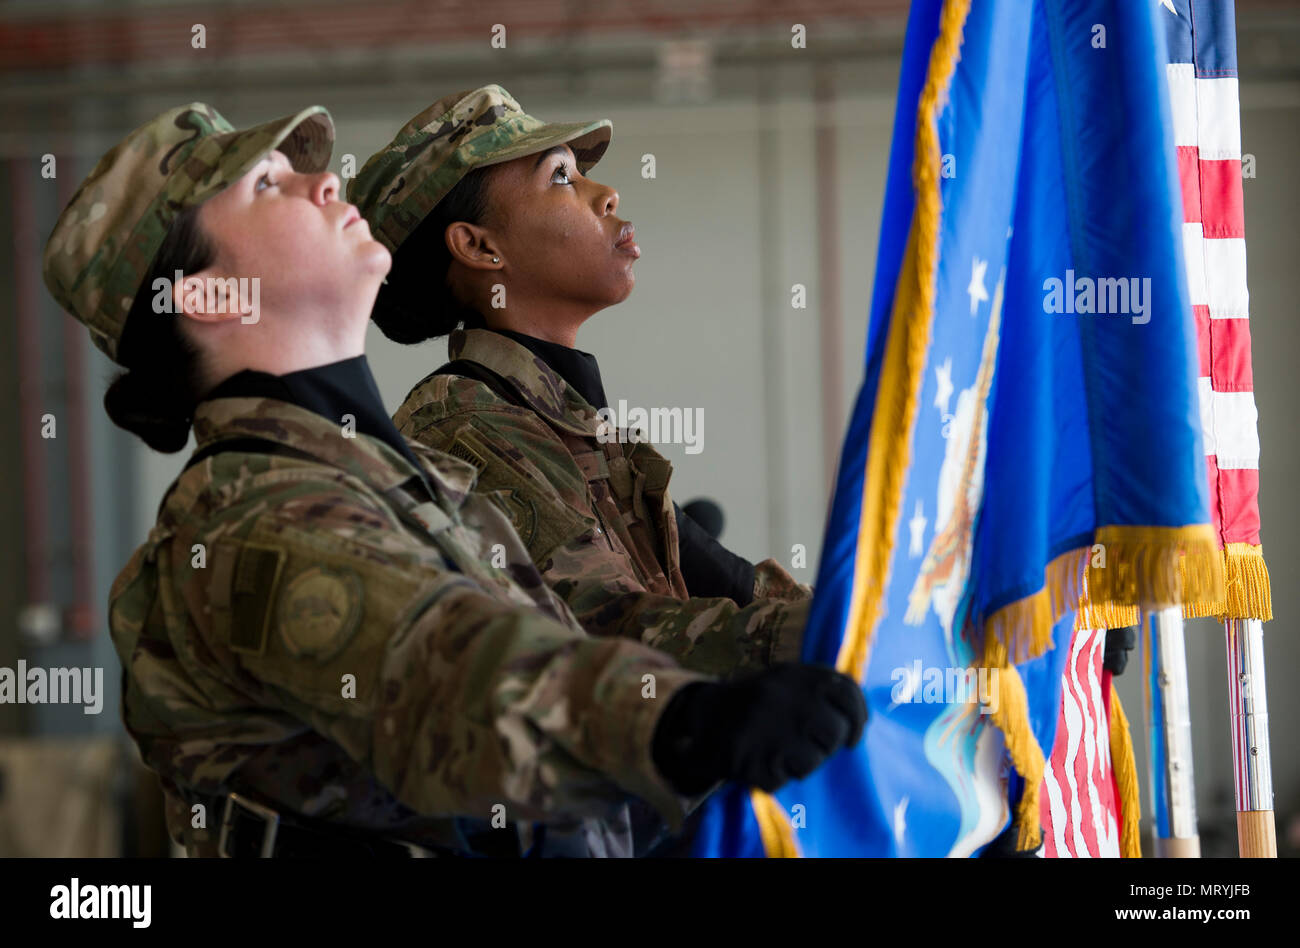 Members of the Bagram Honor Guard set the U.S. Air Force and American flags in place during the 455th Expeditionary Aircraft Maintenance Squadron change of command at Bagram Airfield, Afghanistan, July 14, 2017. During the ceremony, Lt. Col. Robert Kongaika took command of the 455th EAMXS. (U.S. Air Force photo by Staff Sgt. Benjamin Gonsier) Stock Photo